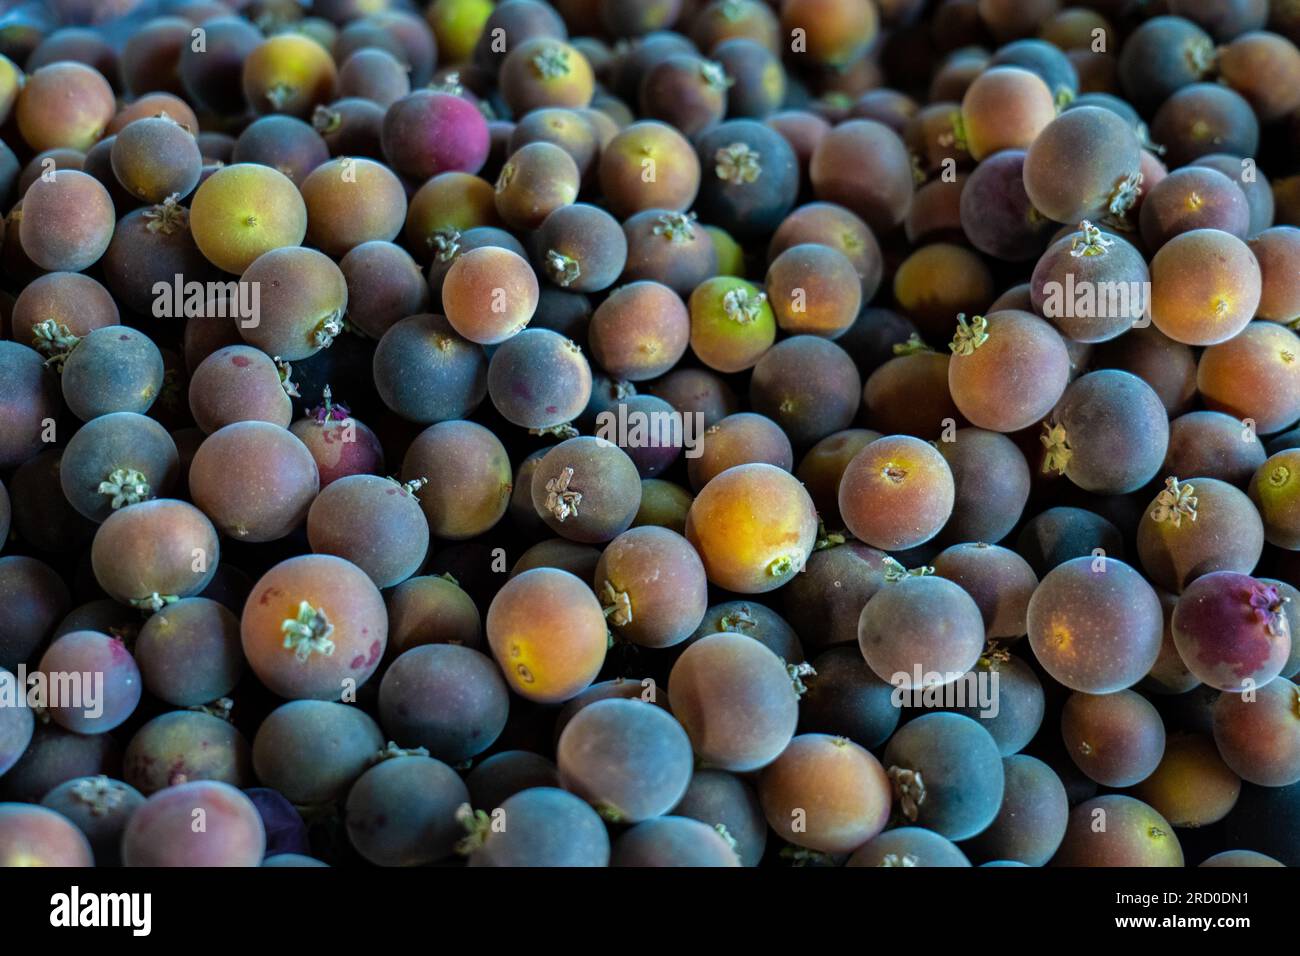 Bunch of Ripe Ketembilla (Dovyalis hebecarpa) Sour Purple Fruit Also Called Ceylon Gooseberry Native to Sri Lanka and India on a Stall in Market 'Mayo Stock Photo